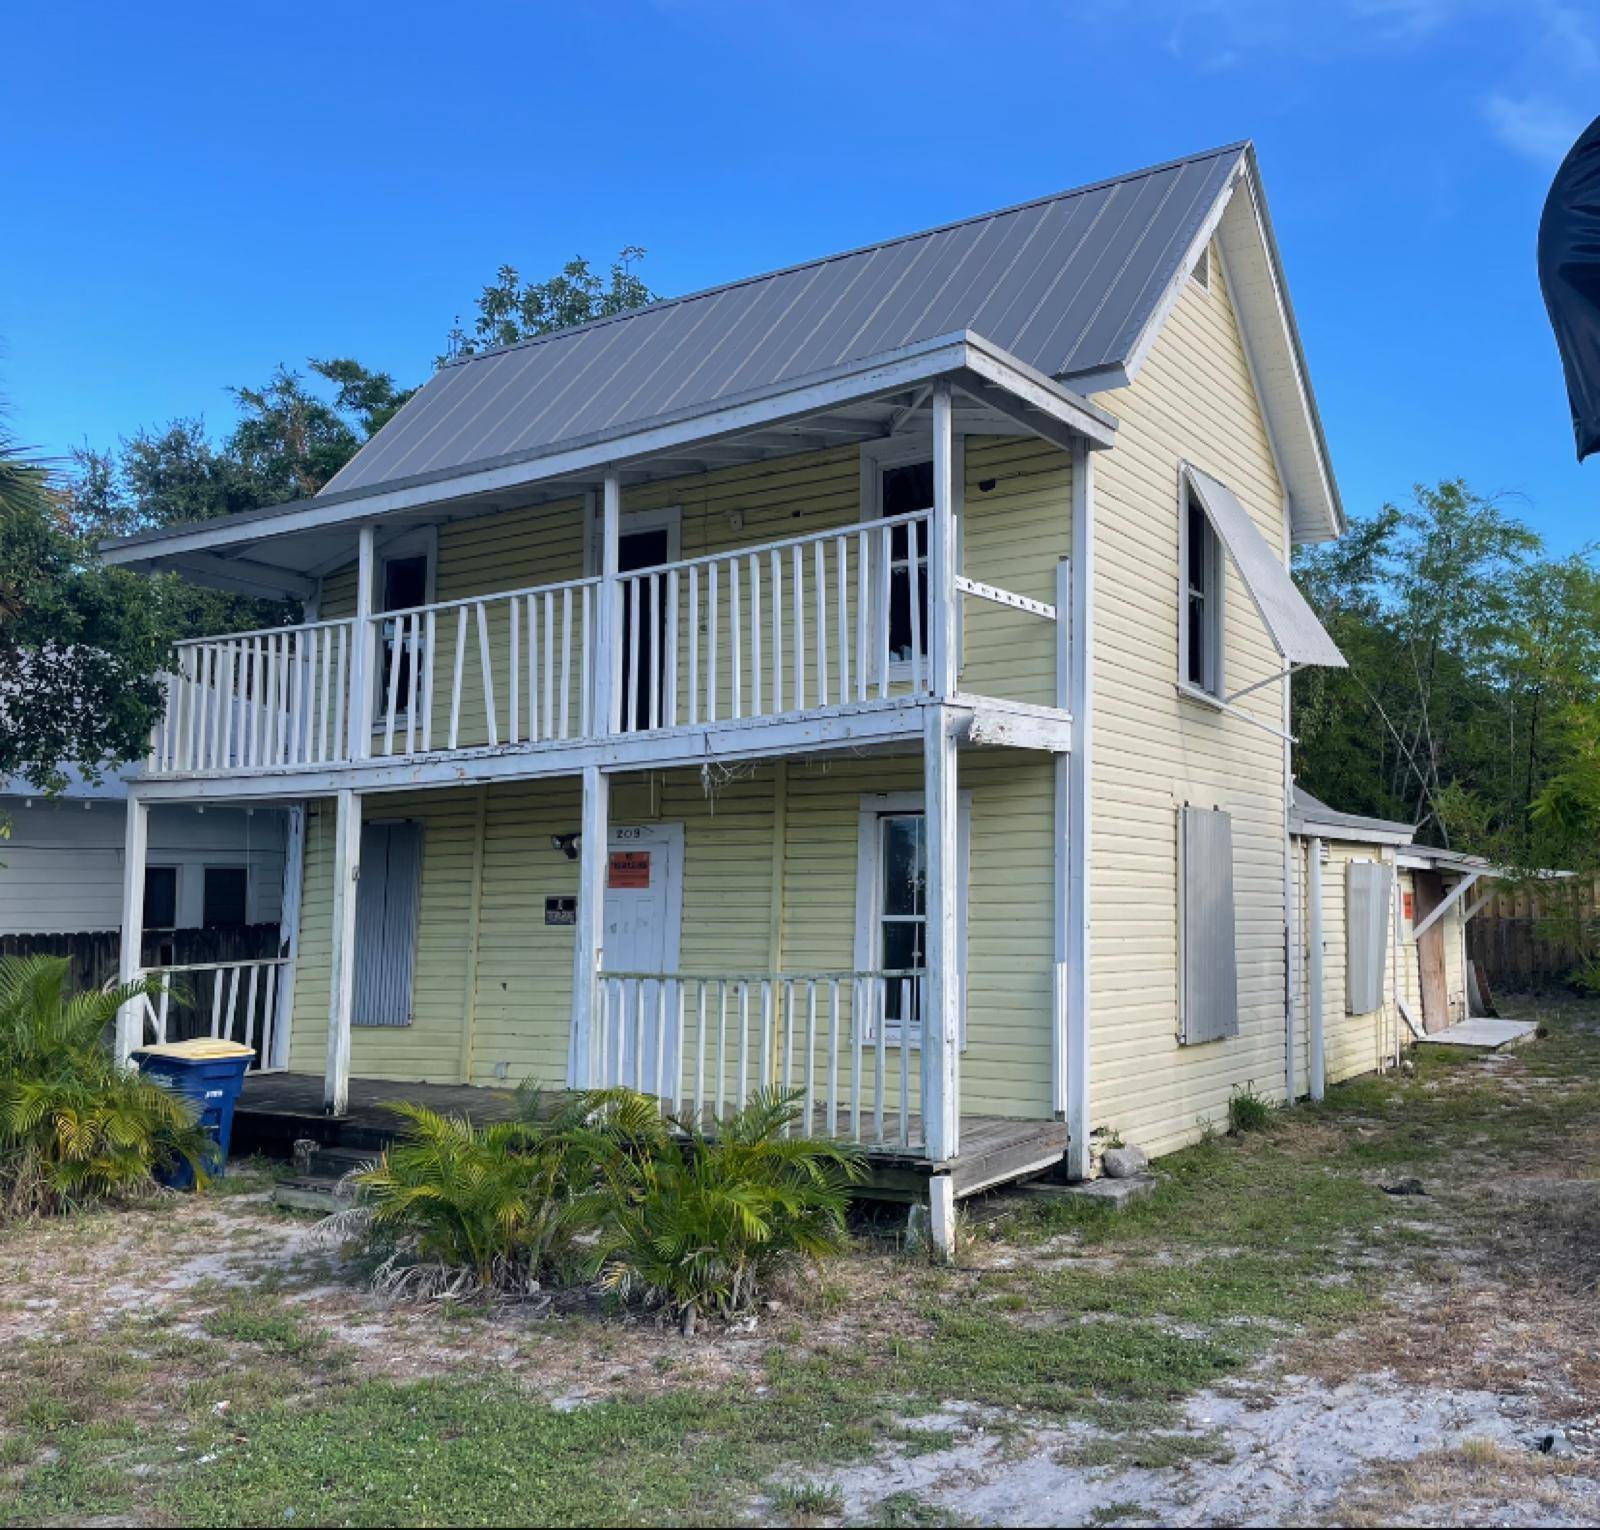 This 1901 Historic Key West style home in downtown Fort Pierce home located 2 blocks from intracoastal waterway, 1 block to Kings Landing and 0.